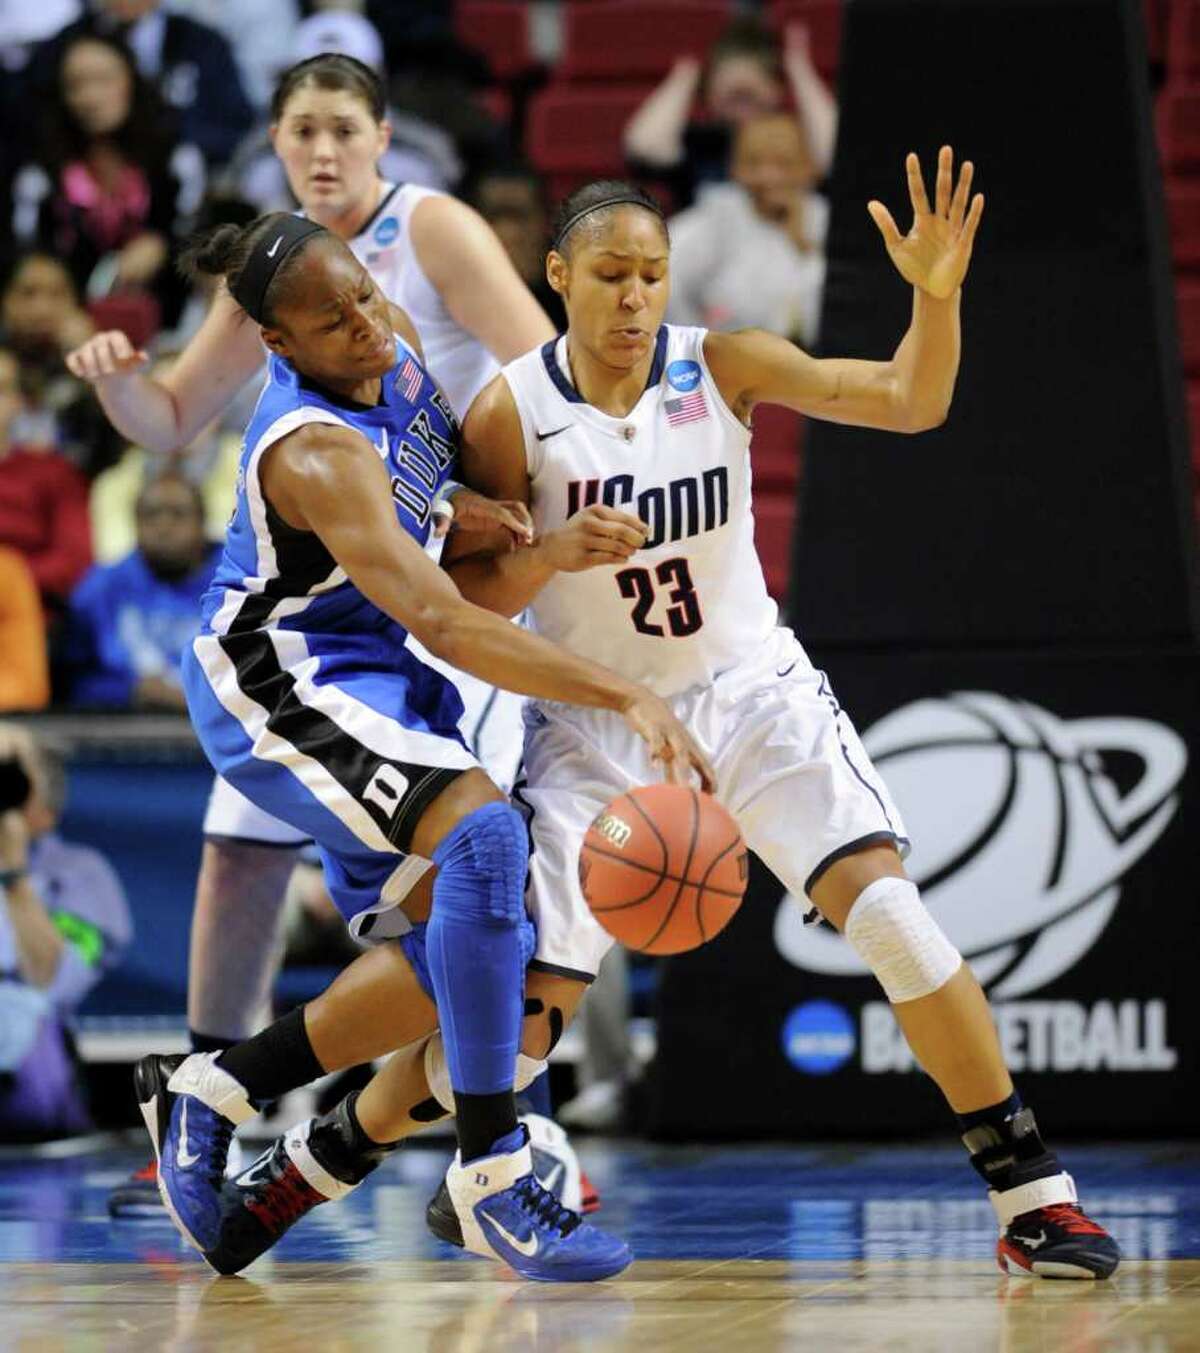 Duke's Karima Christmas, left, battles for control of the ball against Connecticut's Maya Moore (13) in the first half of an NCAA women's college basketball tournament regional final, Tuesday, March 29, 2011, in Philadelphia. (AP Photo/Barbara Johnston)